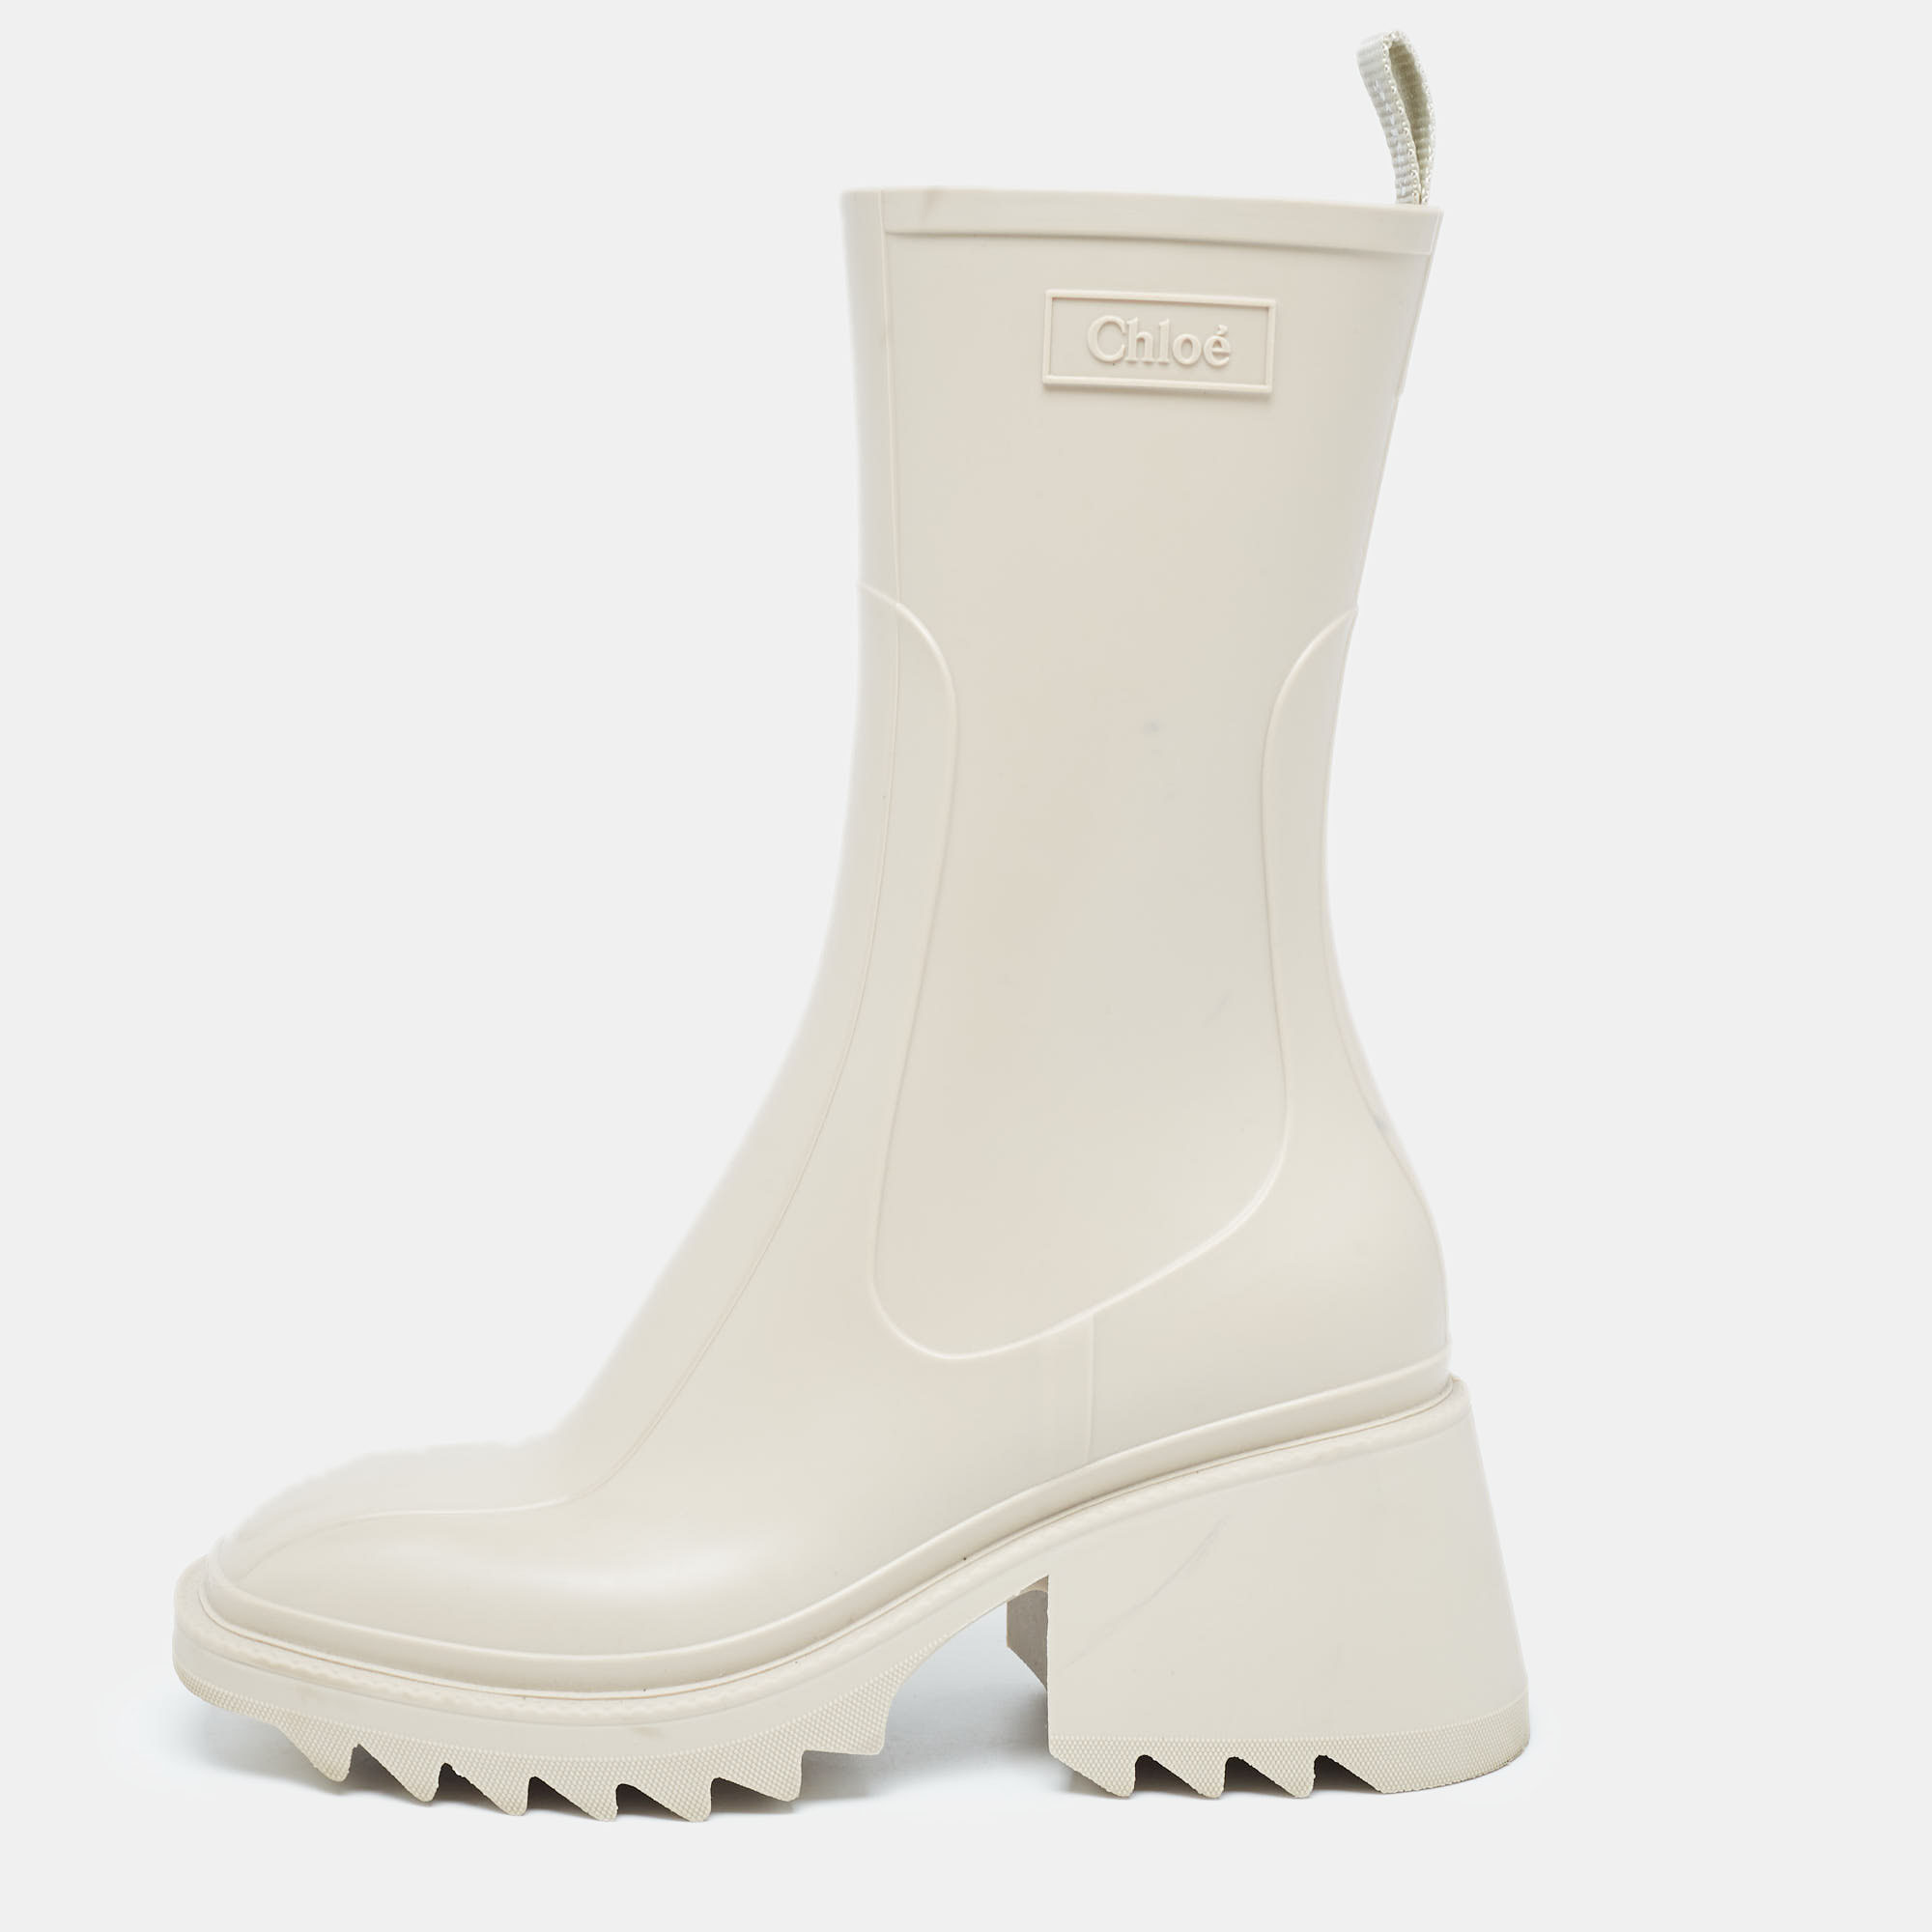 Chlo&eacute; cream rubber iuhnr ankle boots size 36